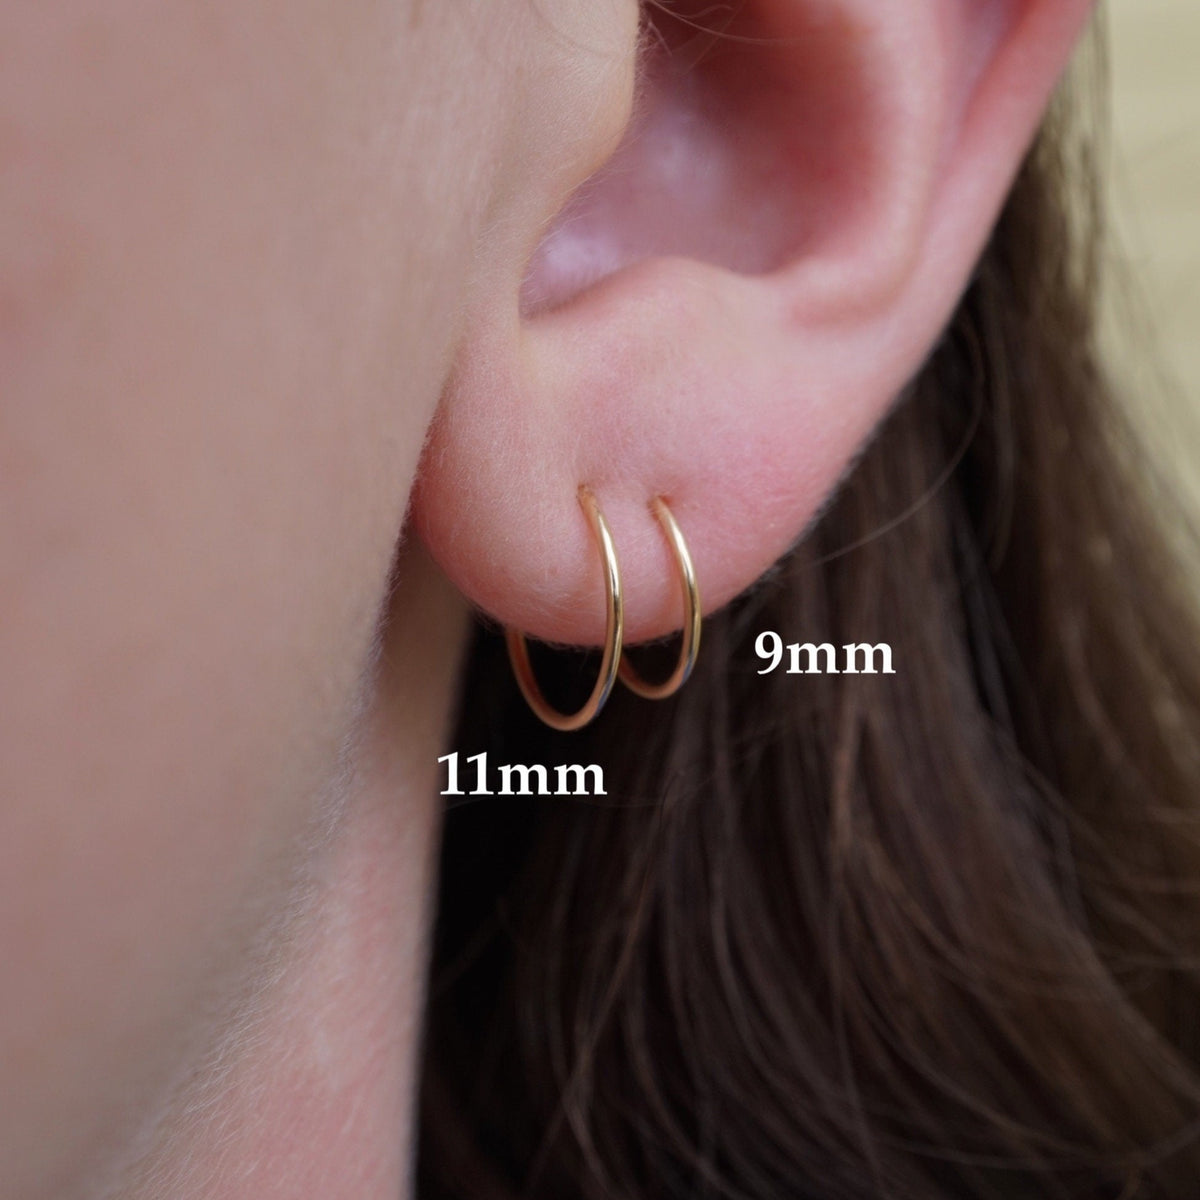 Two Sets of Earrings - 14K Gold Filled Mini Hoops | 20g Small Gold Silver Hoops | Sleepers | Nose Rings | Cartilage Hoops